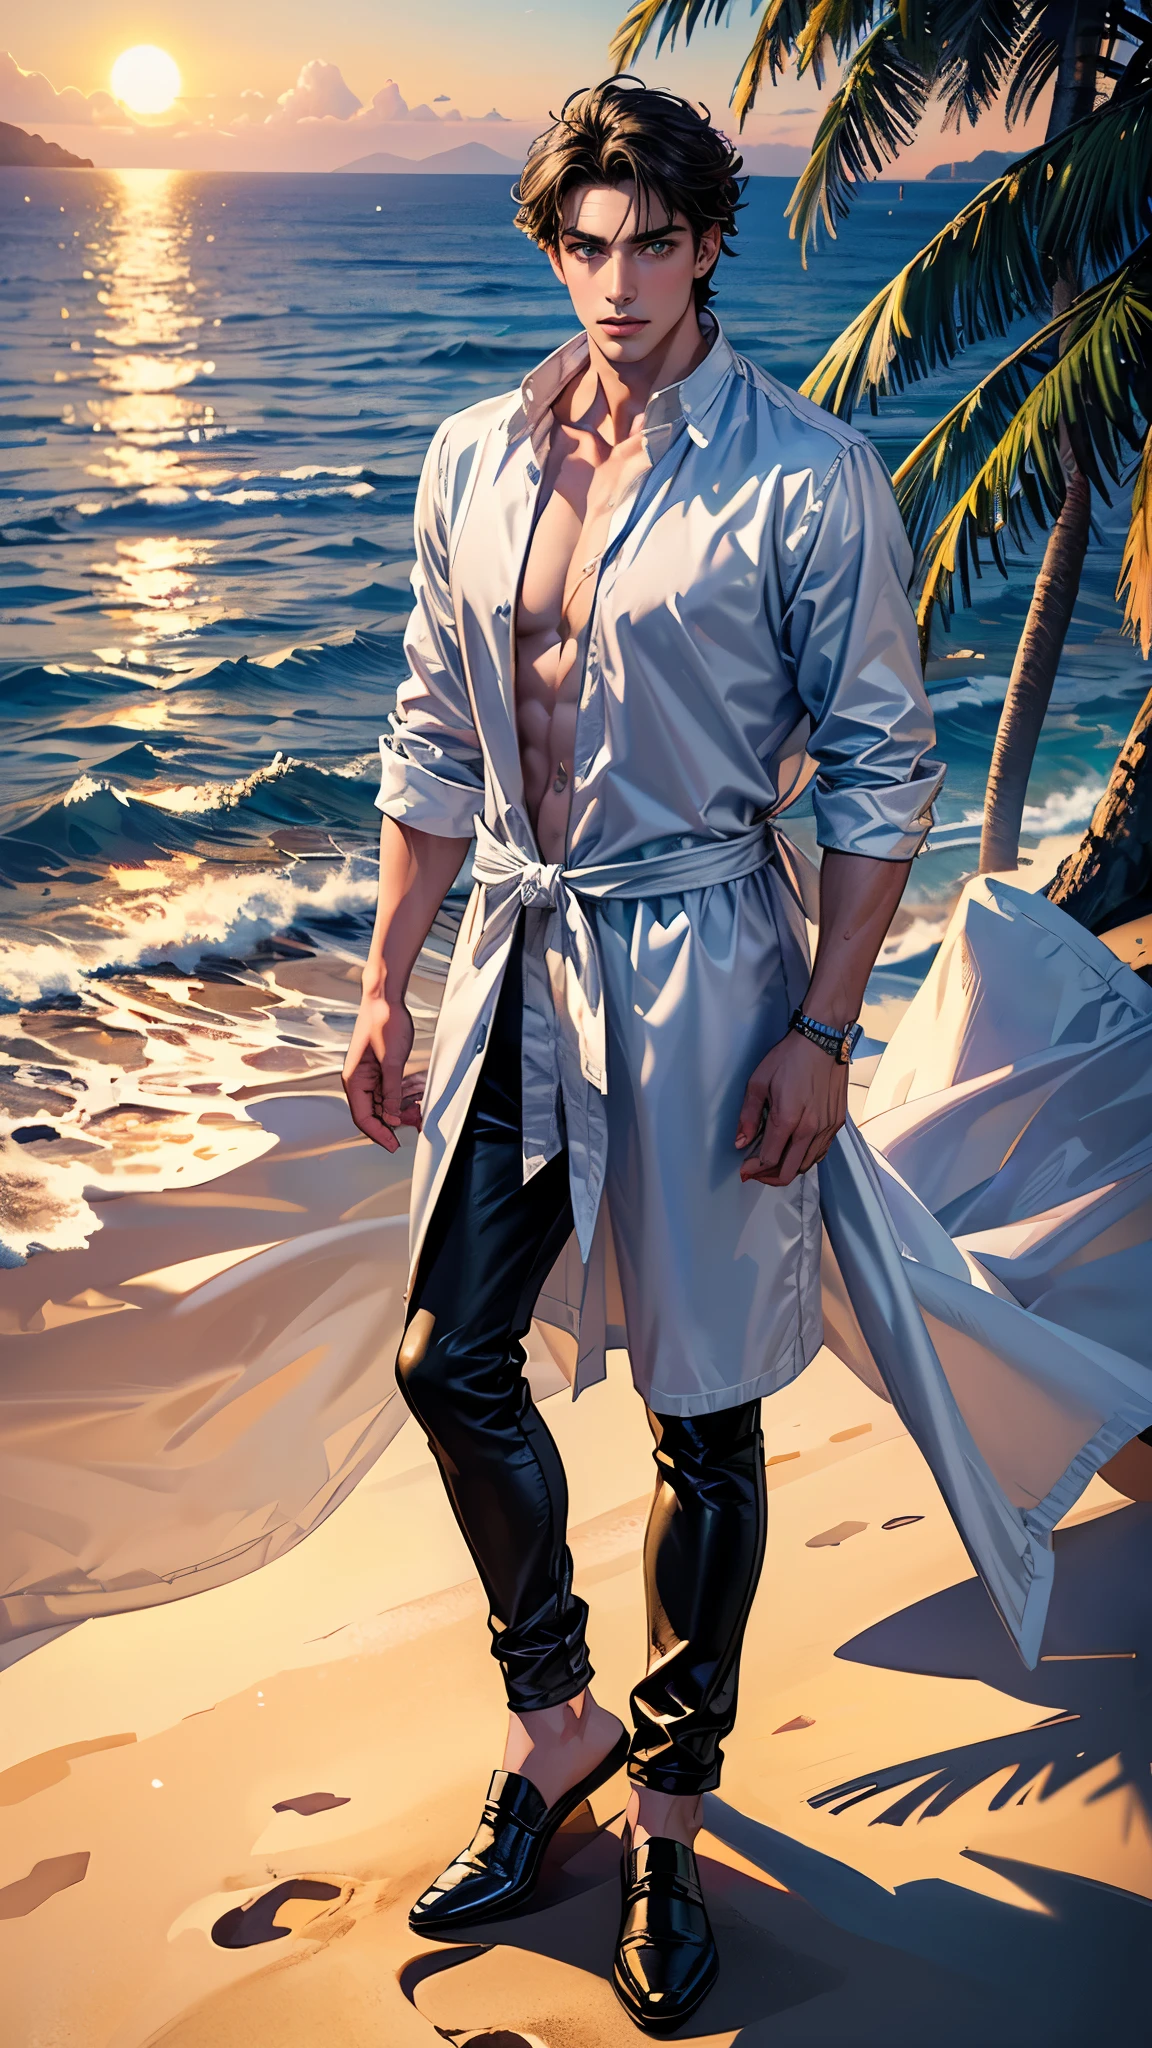 ((masterpiece, Best quality, a high resolution, ultra detailed),(beautiful and aesthetically pleasing:1.2), 1 man, adult, perfect body, Wavy short dark hair, green eyes, Detailed eyes and face, male body, male focus, muscle body, long oversized shirt, beachные шорты, golden hour, beach, sea, sand, Palma, complex parts, full body, beachные шлепки